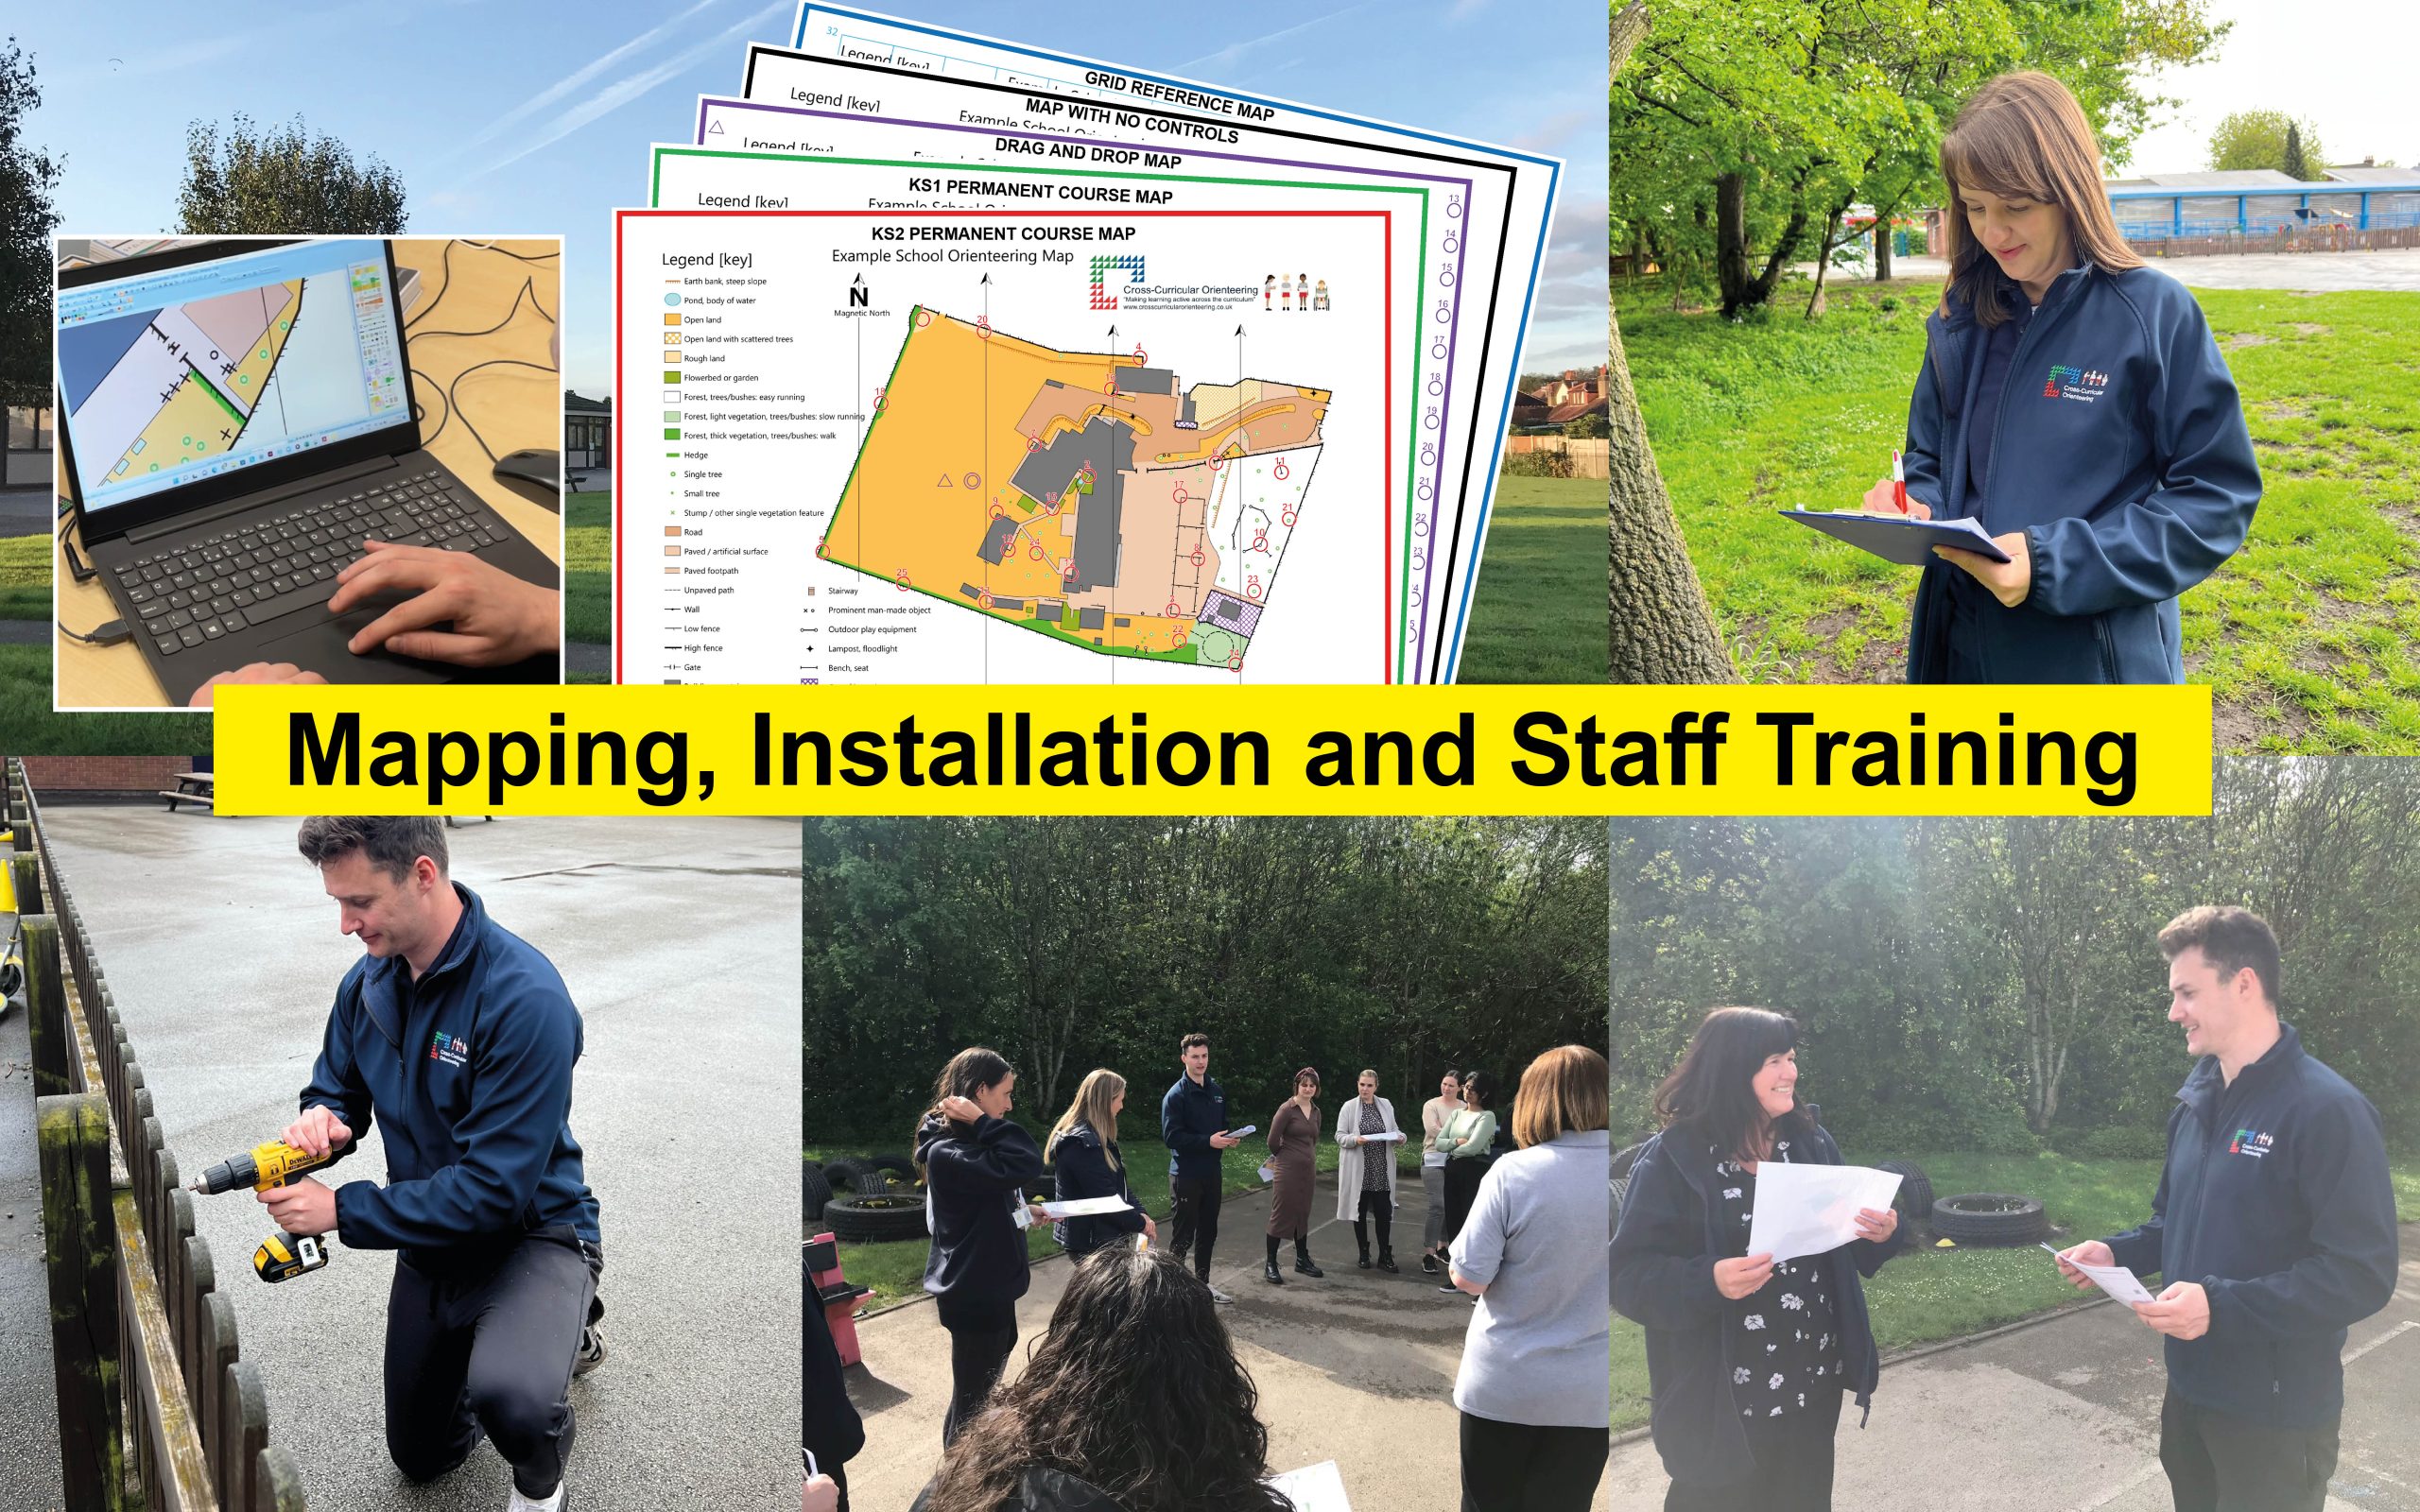 Images of mapping installation and training - long for mobile3